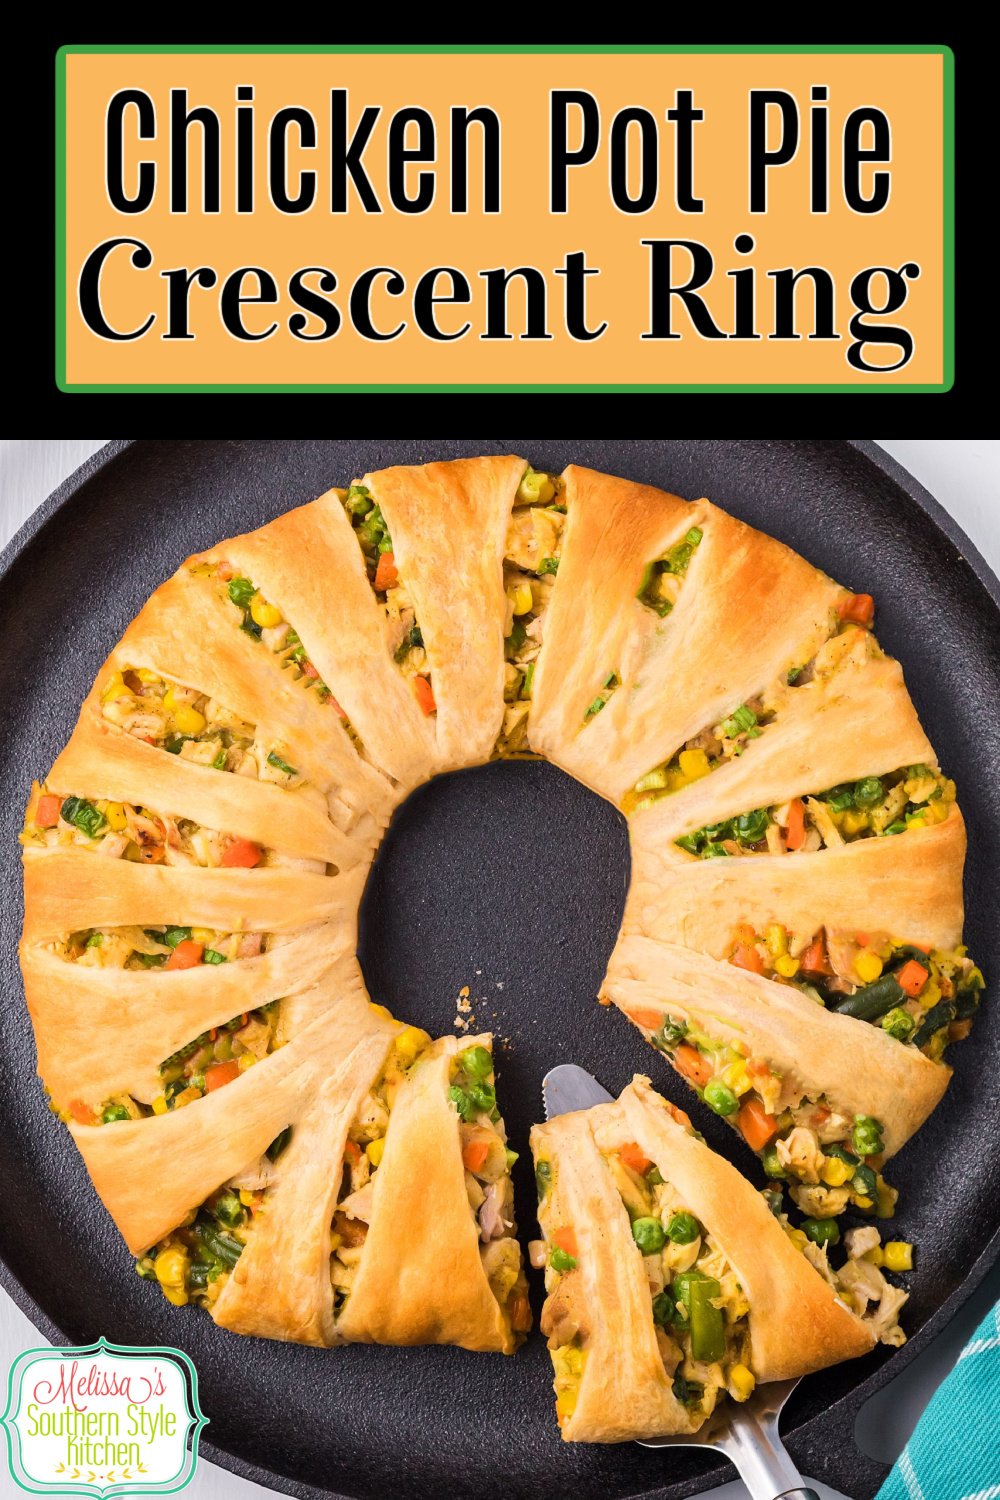 This mouthwatering Chicken Pot Pie Crescent Ring recipe features all of the familiar flavors we love wrapped up in crescent roll dough #chickenpotpie #chickenrecipes #rotisseriechickenrecipes #chickencrescentring #crescentrollrecipes #easychickenbreastrecipes via @melissasssk